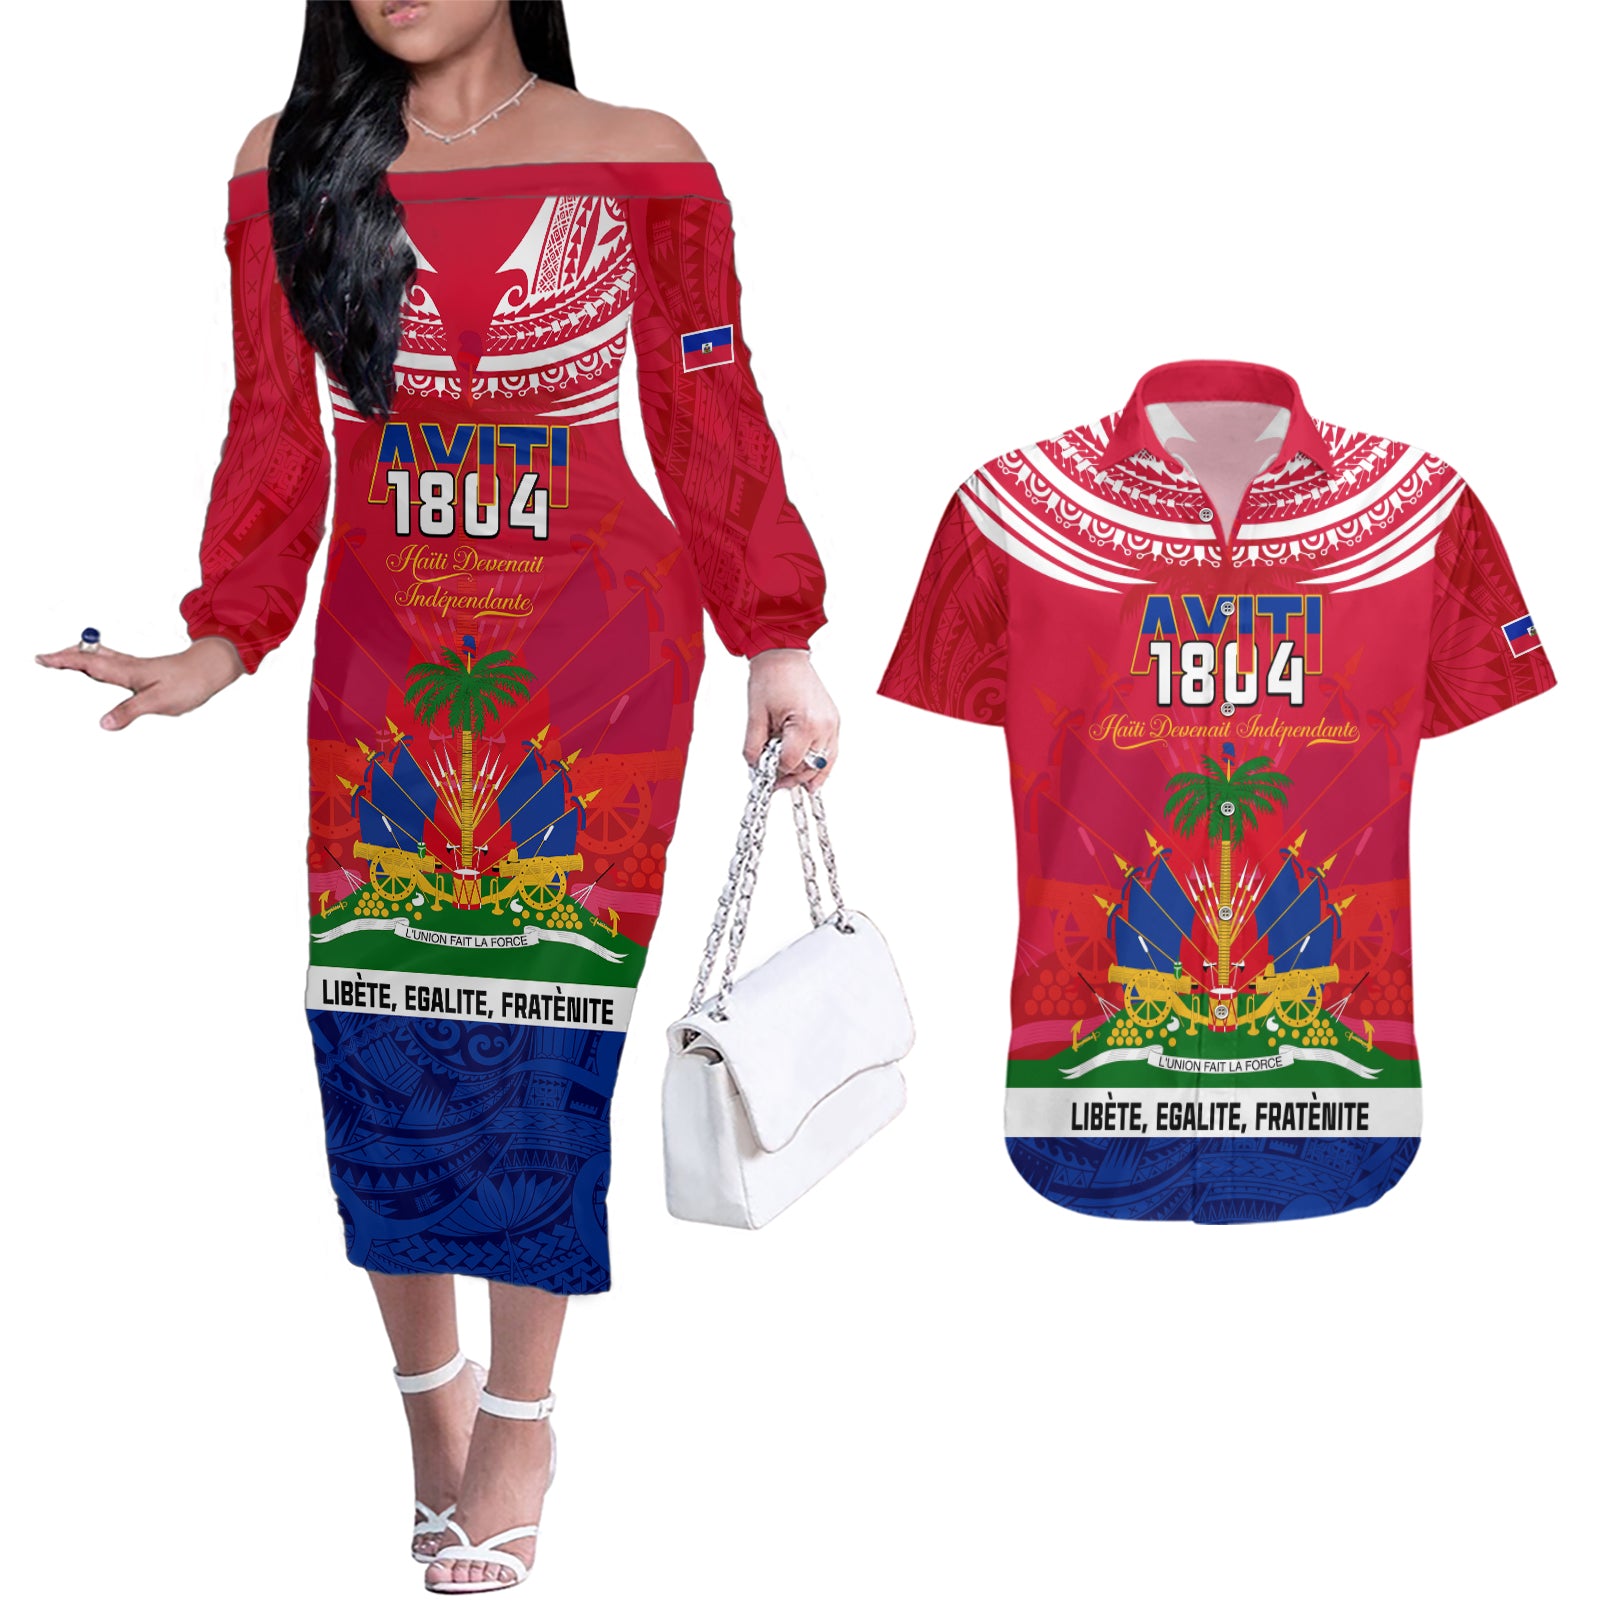 haiti-independence-day-couples-matching-off-the-shoulder-long-sleeve-dress-and-hawaiian-shirt-libete-egalite-fratenite-ayiti-1804-with-polynesian-pattern